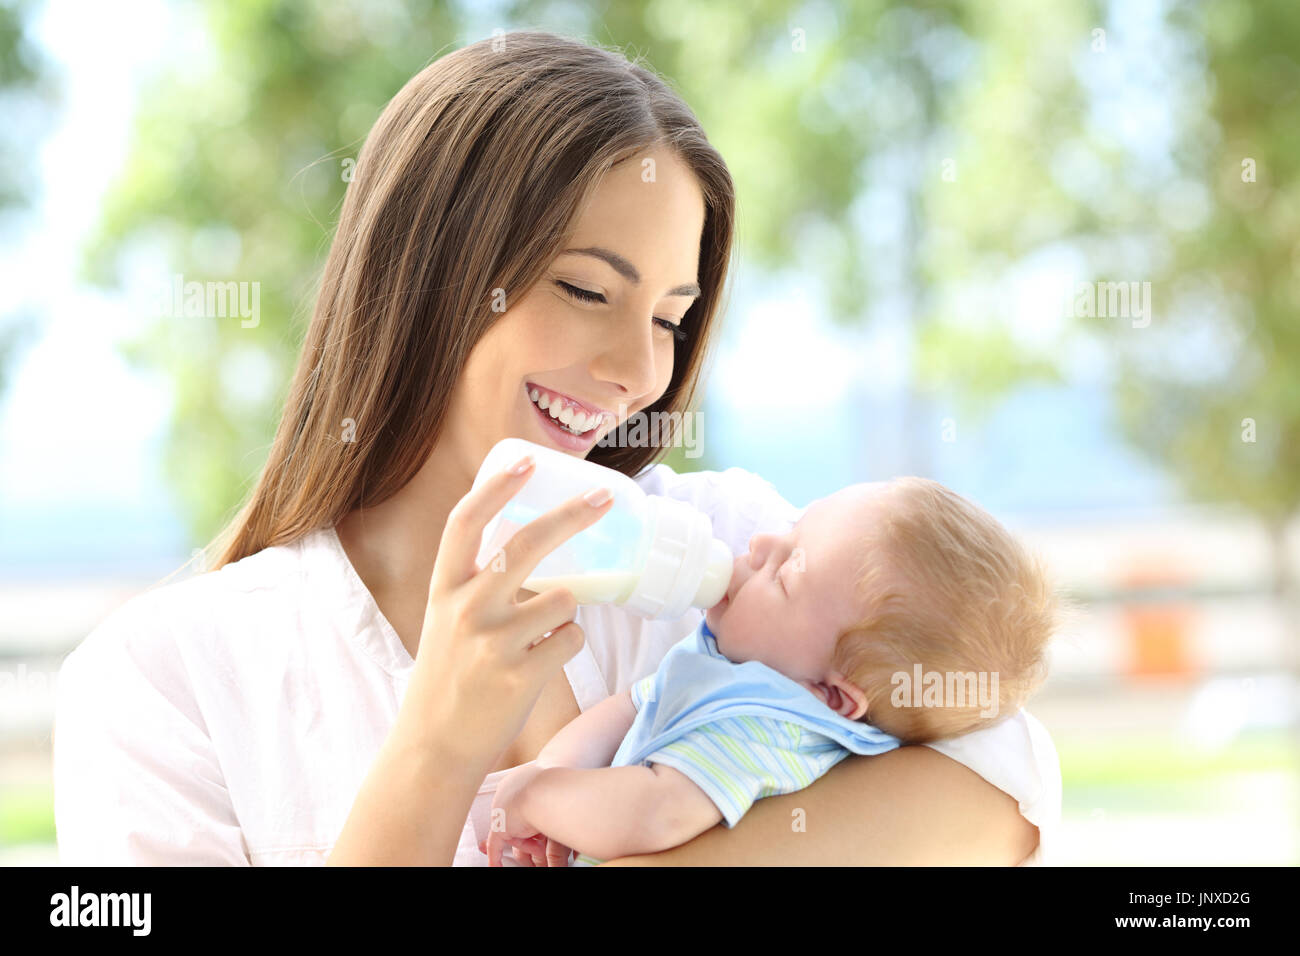 Portrait of a happy mother giving bottle feeding to her baby outdoors Stock Photo